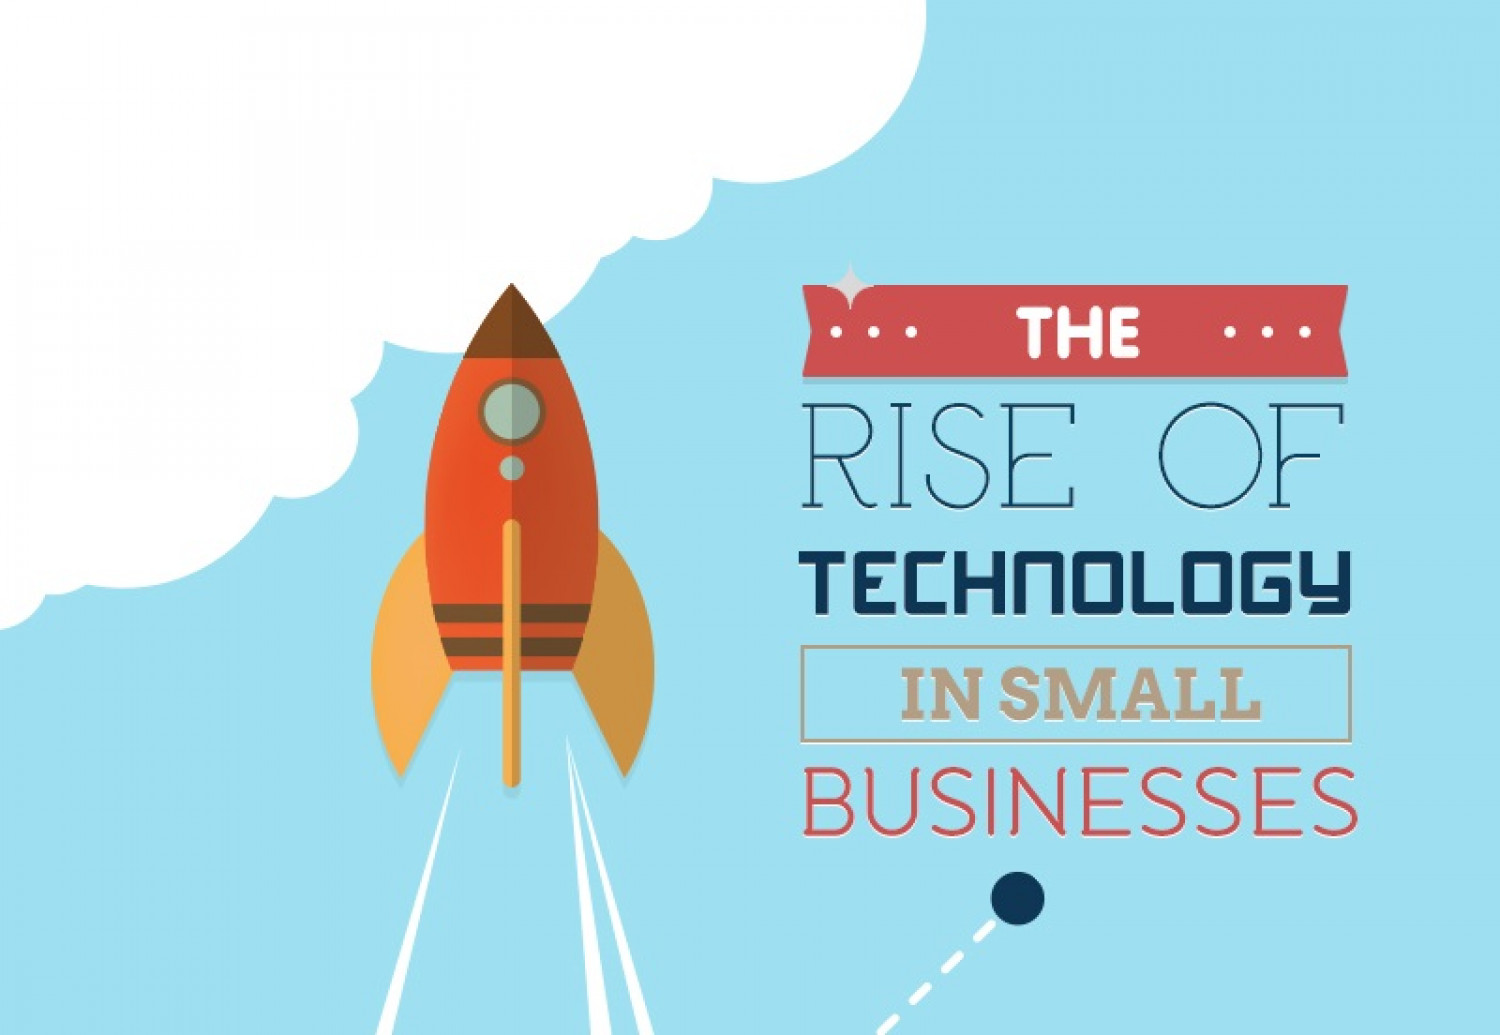 The Rise of Technology in Small Businesses  Infographic